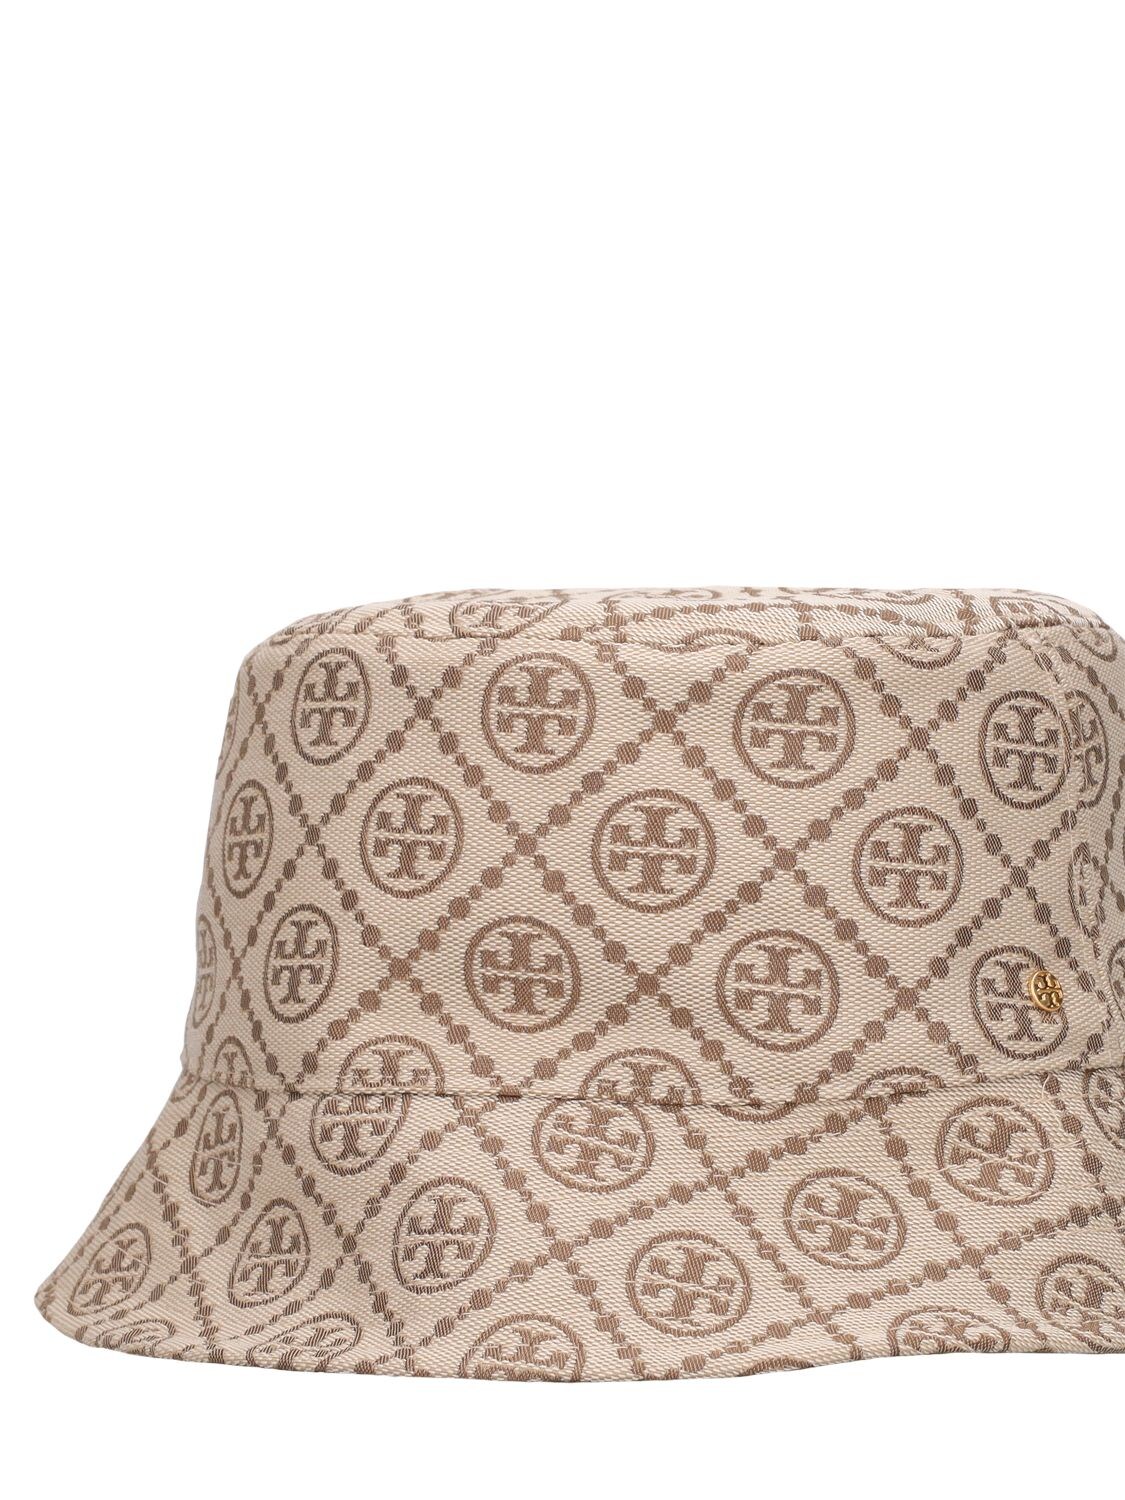 Tory Burch T Monogram Embroidered Bucket Hiking Hat Hazel / Tory Red One Size